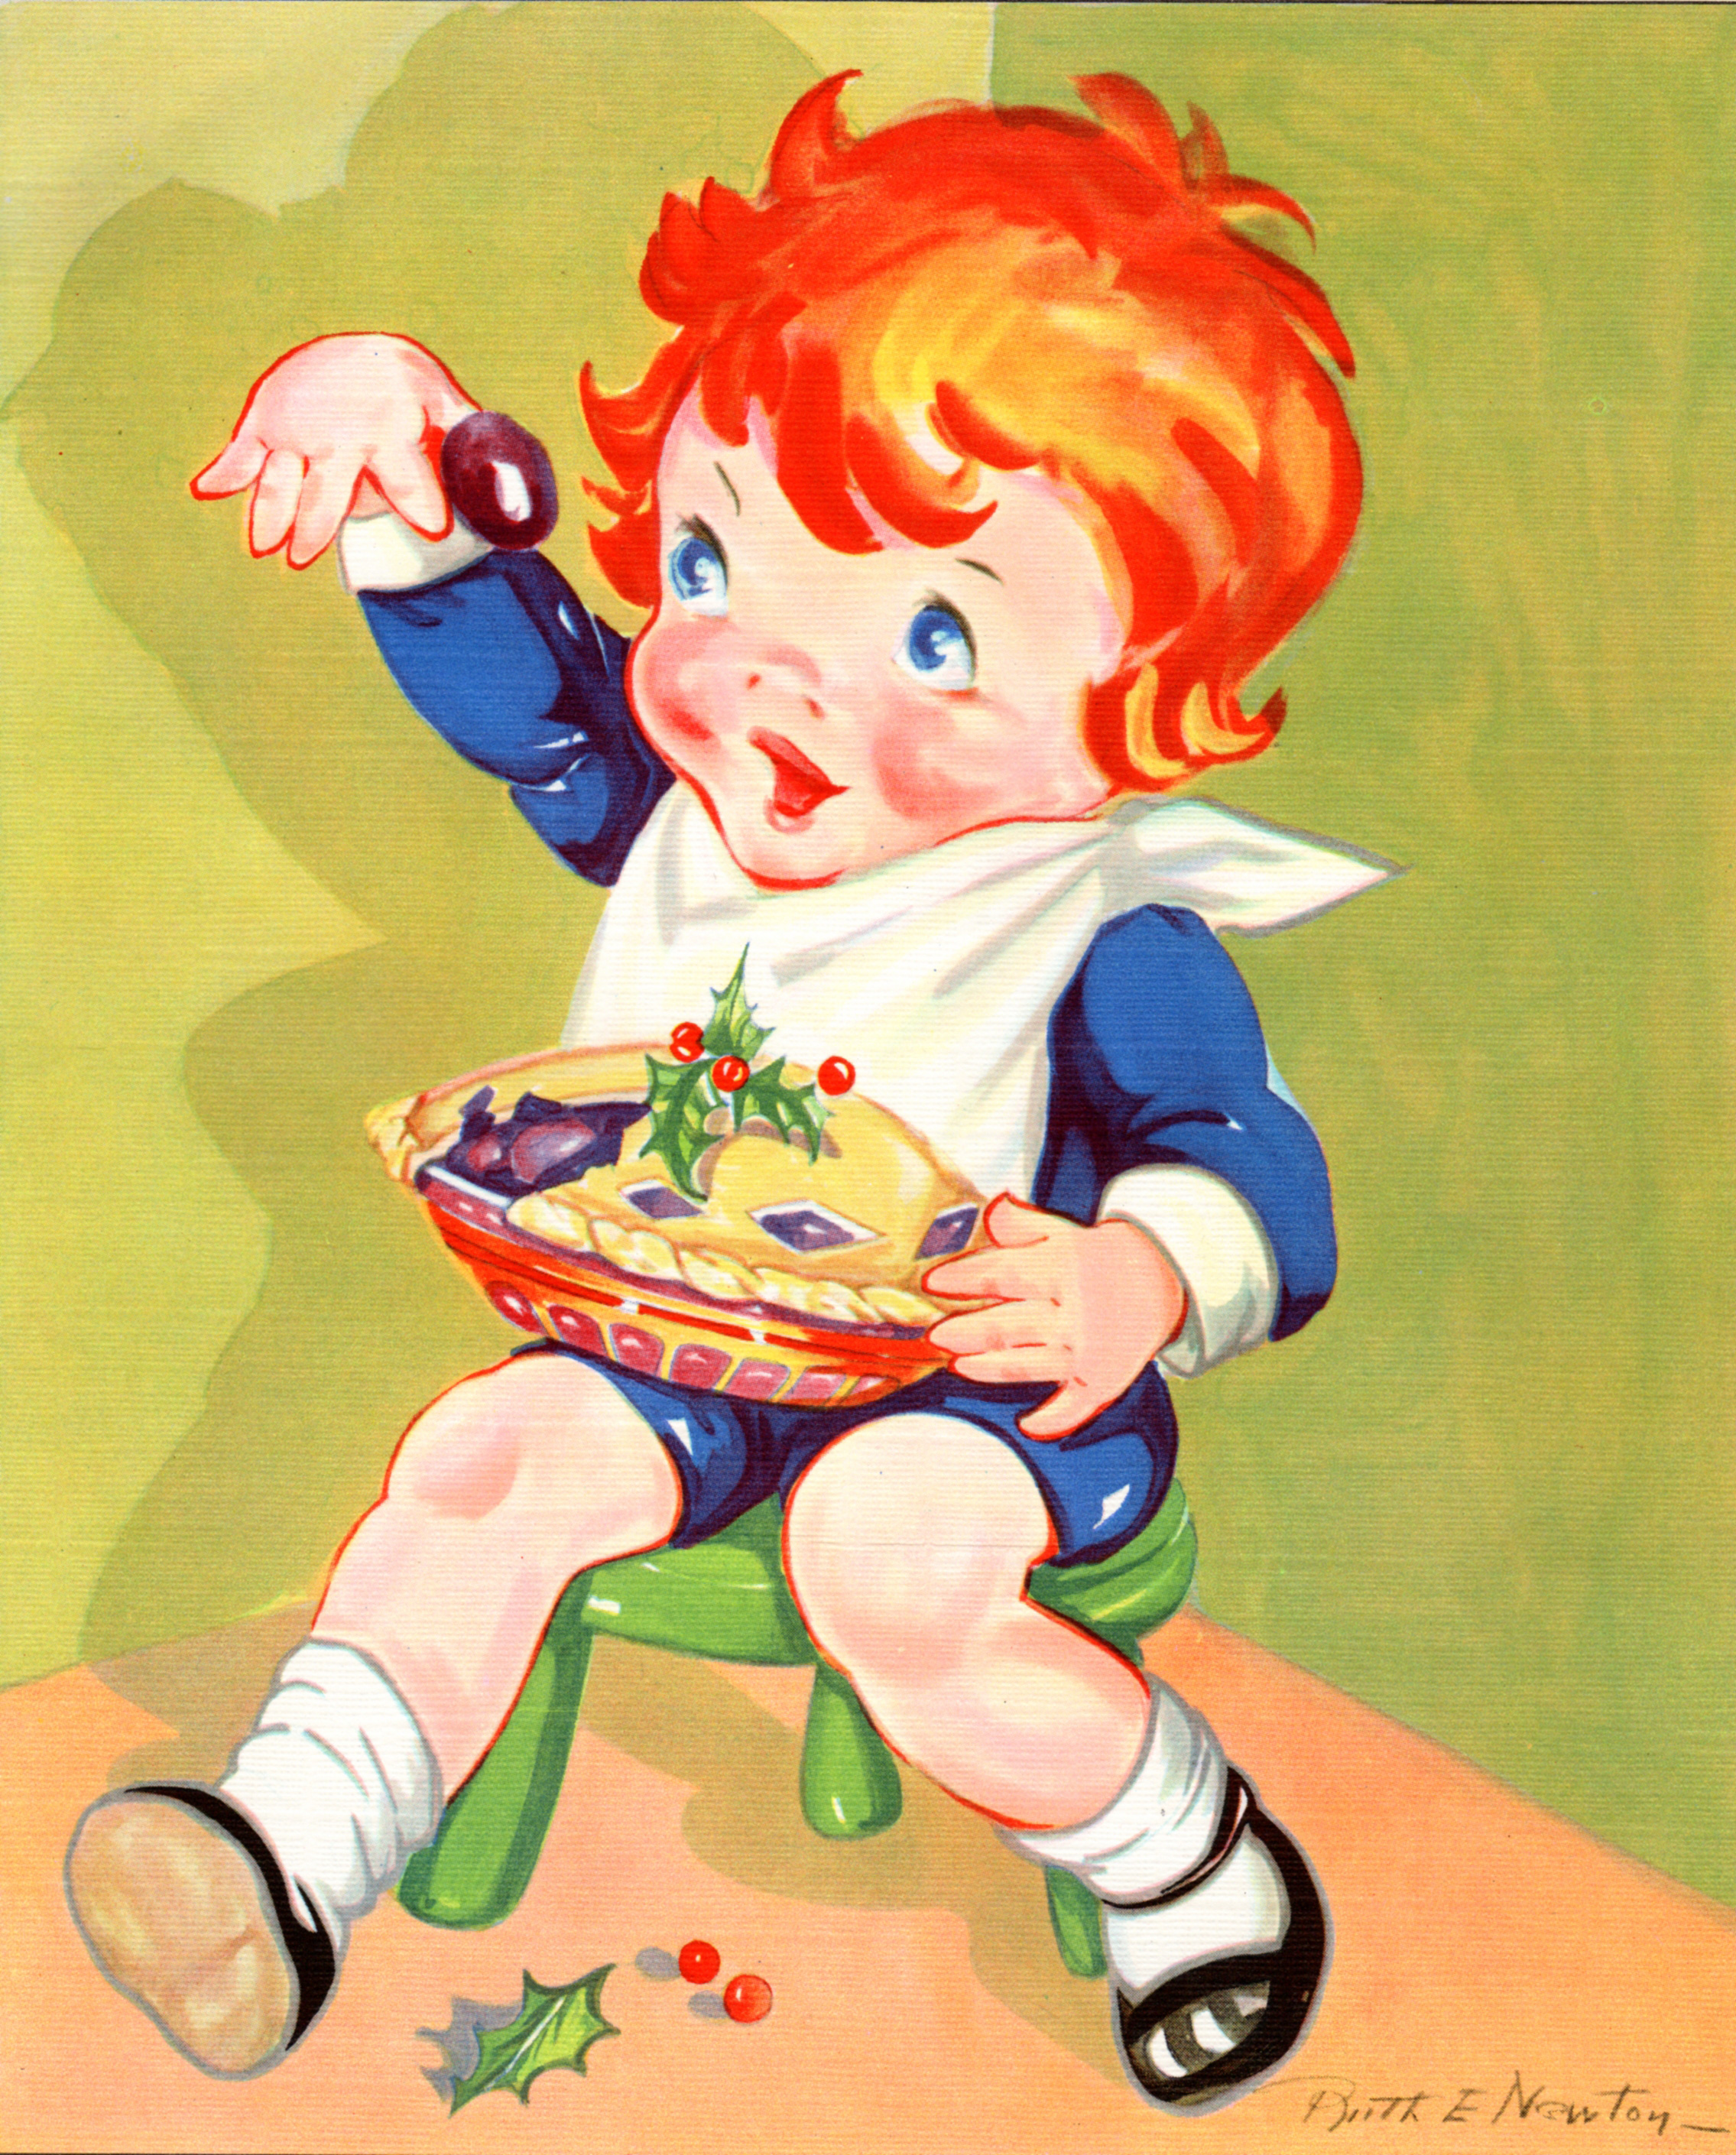 Mother Goose nursery rhymes illustrations by Ruth E. Newton (1943)